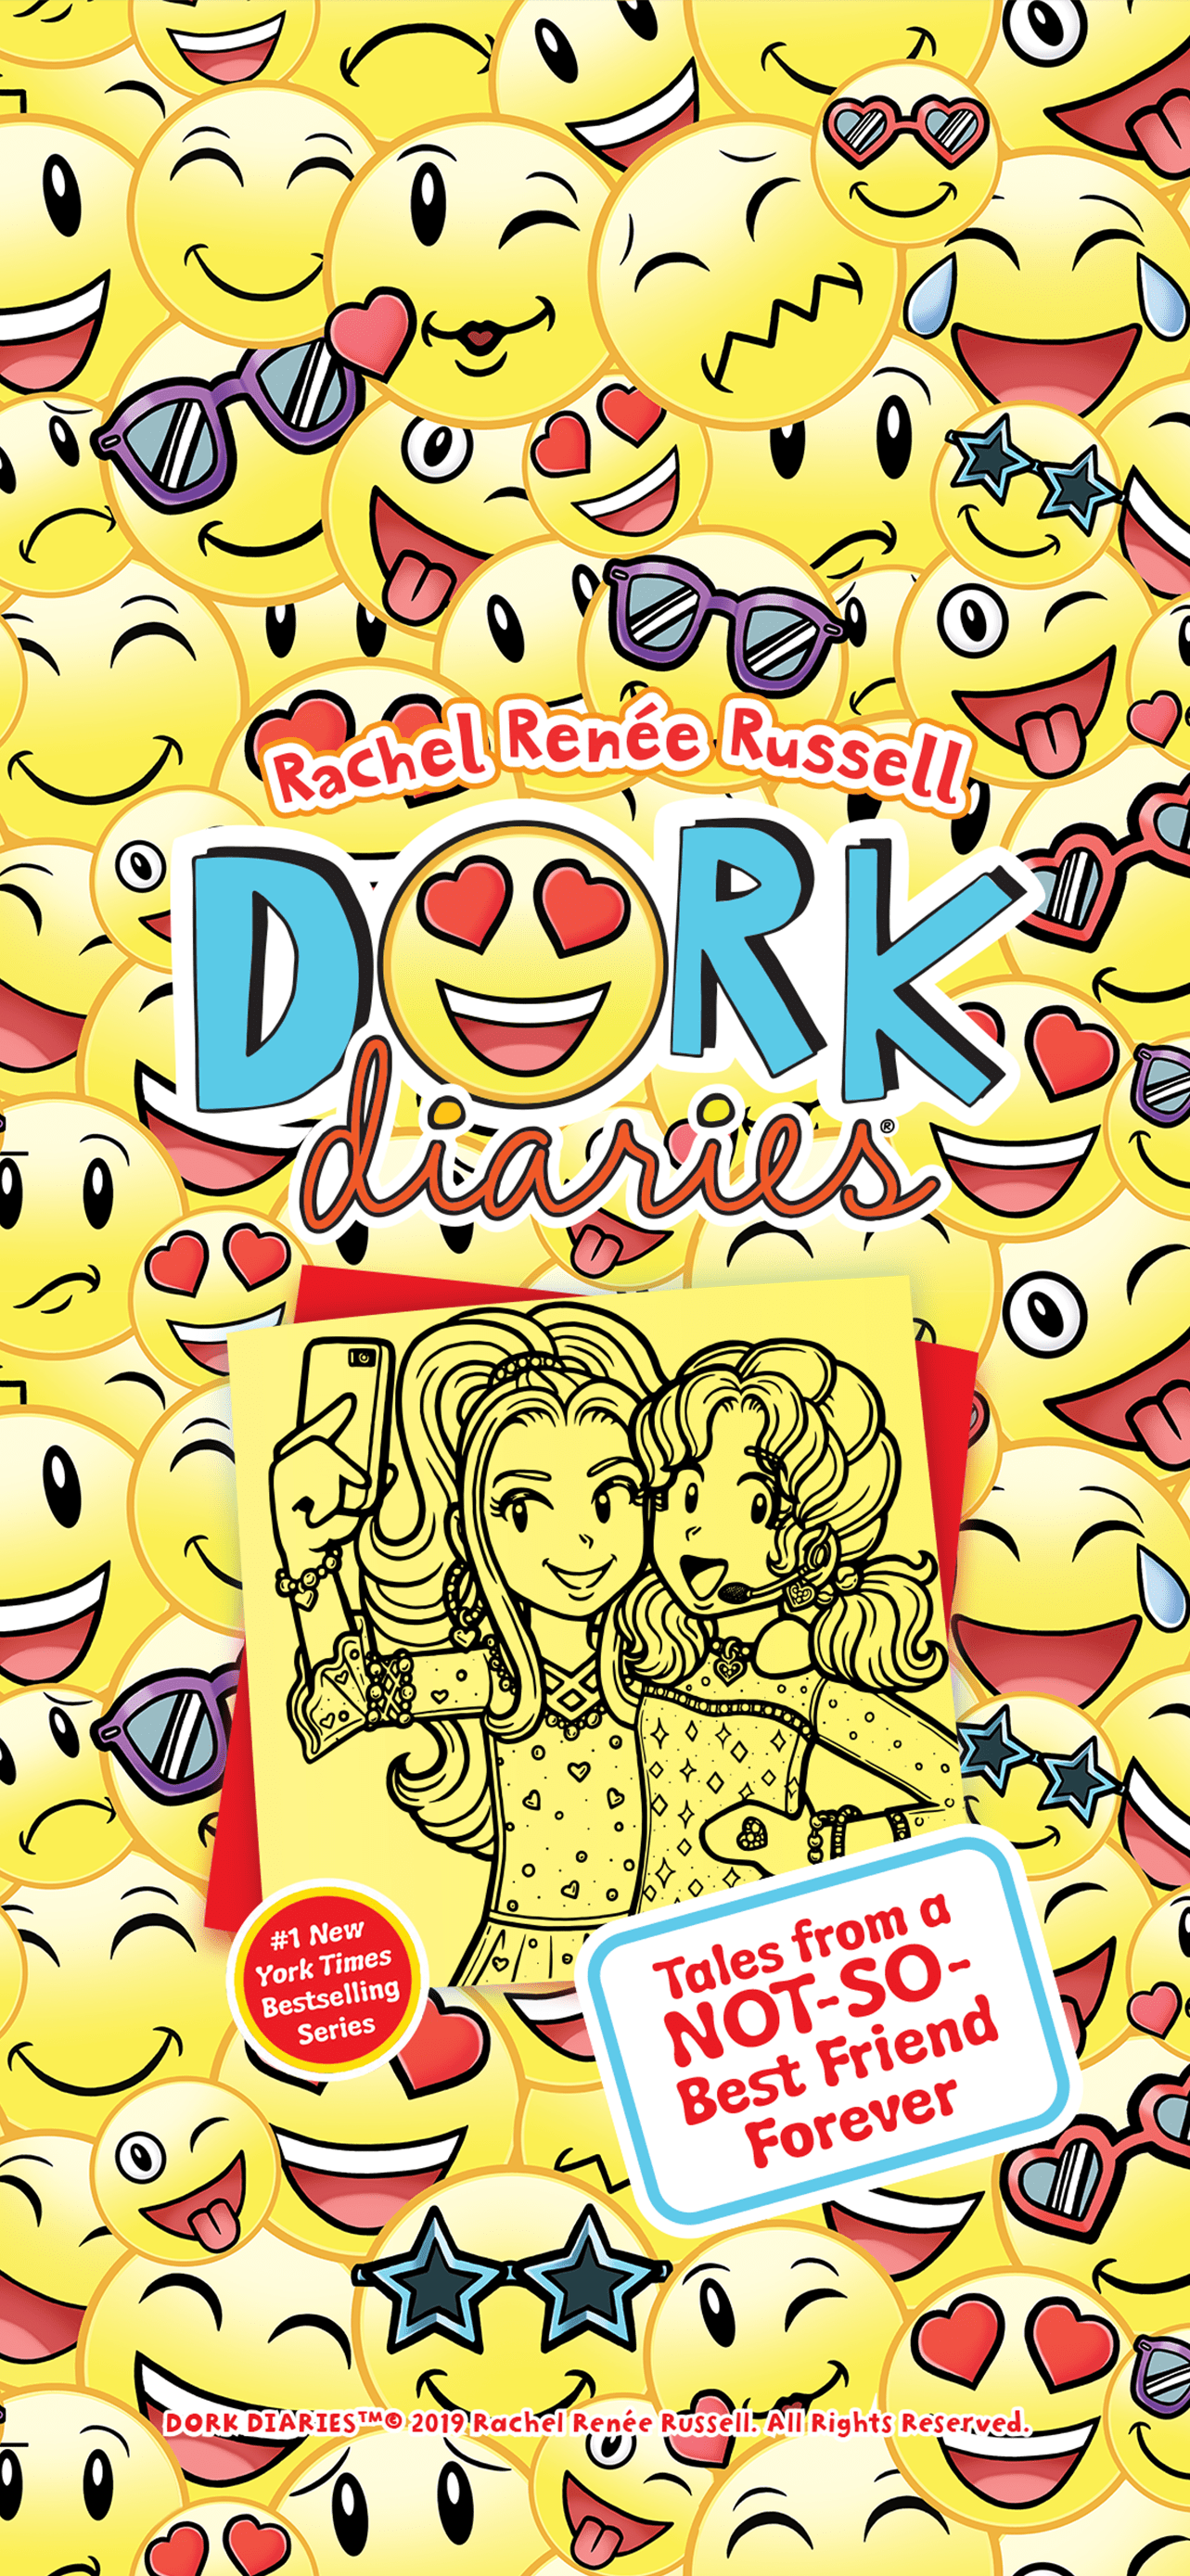 Tales from a Not-So-Best Friends Forever – Wallpaper – Dork Diaries